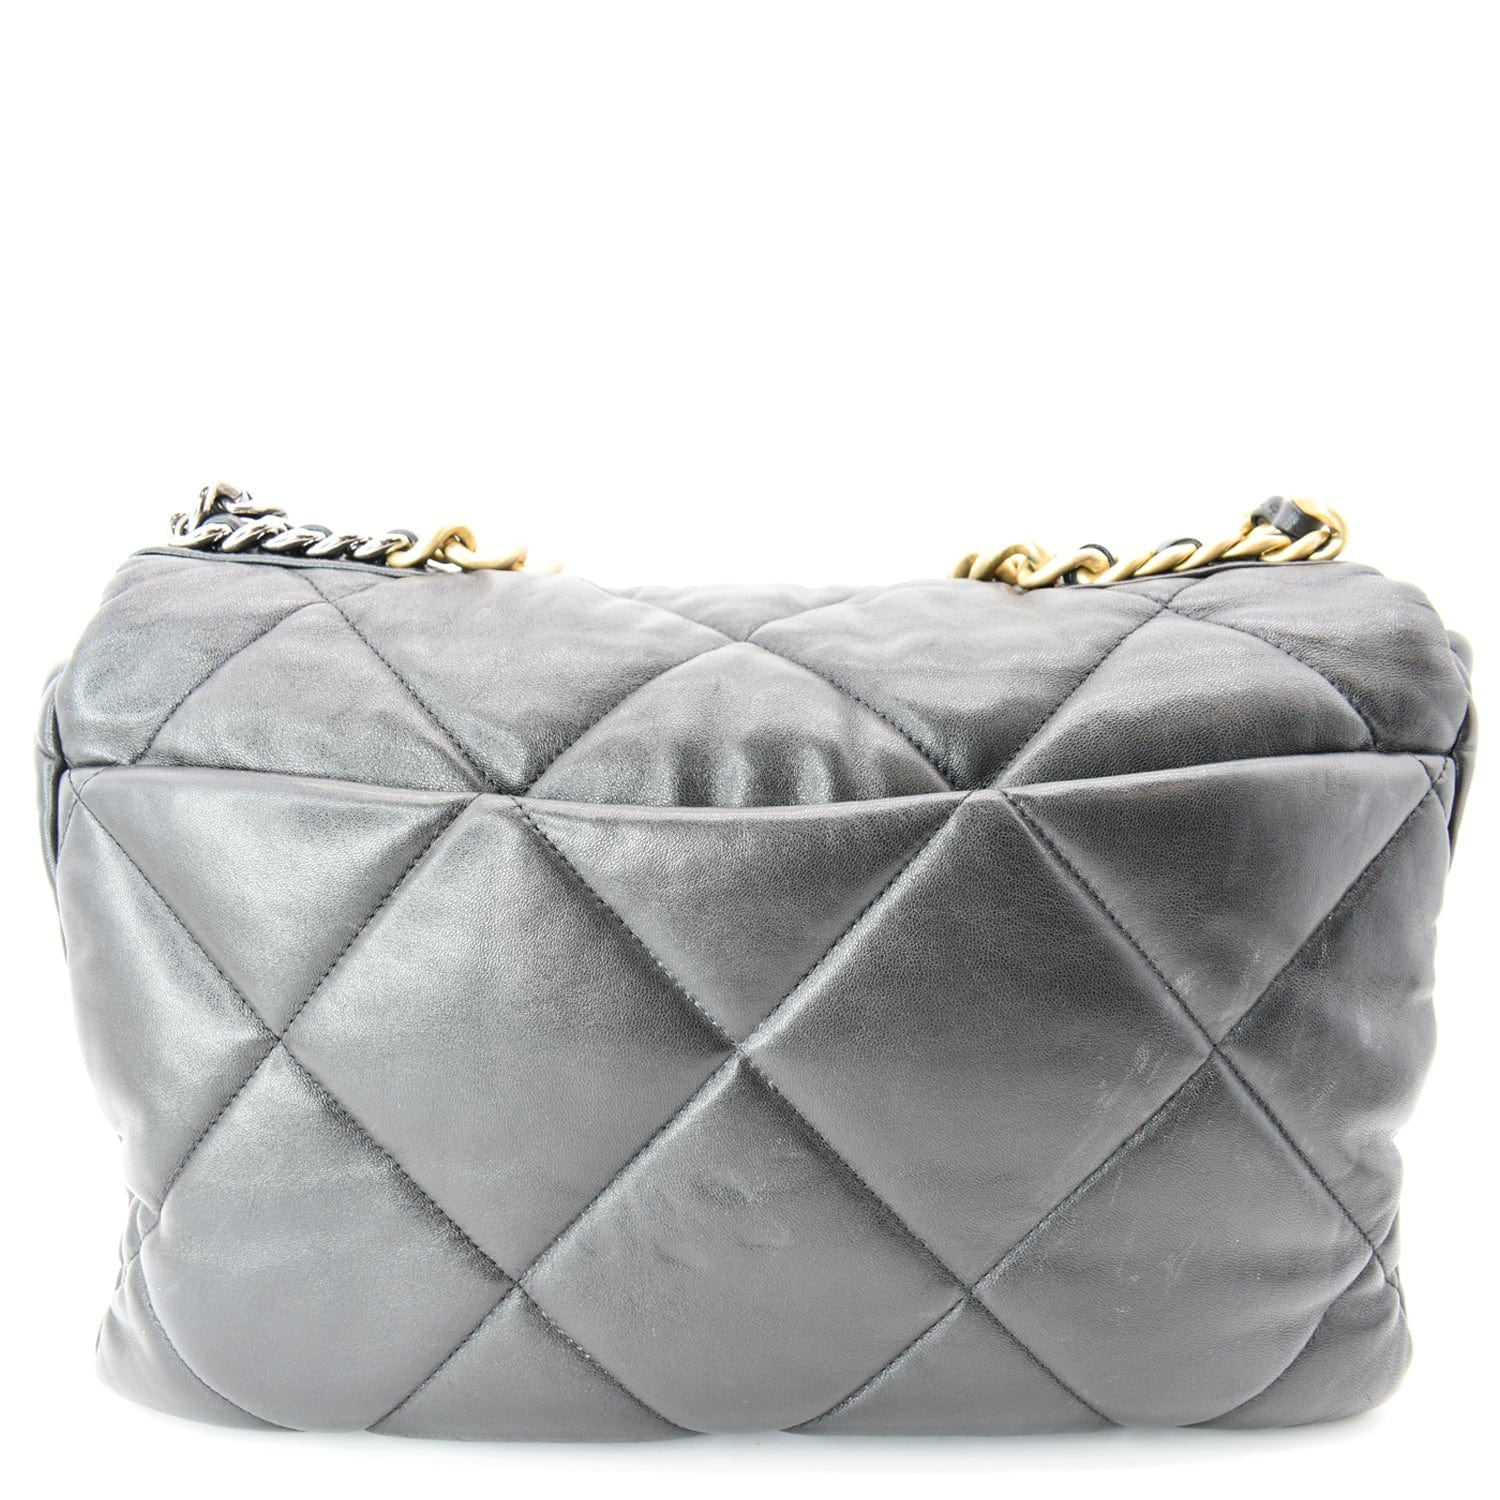 Chanel Grey Quilted Lambskin Double Flap Bag Pale Gold Hardware